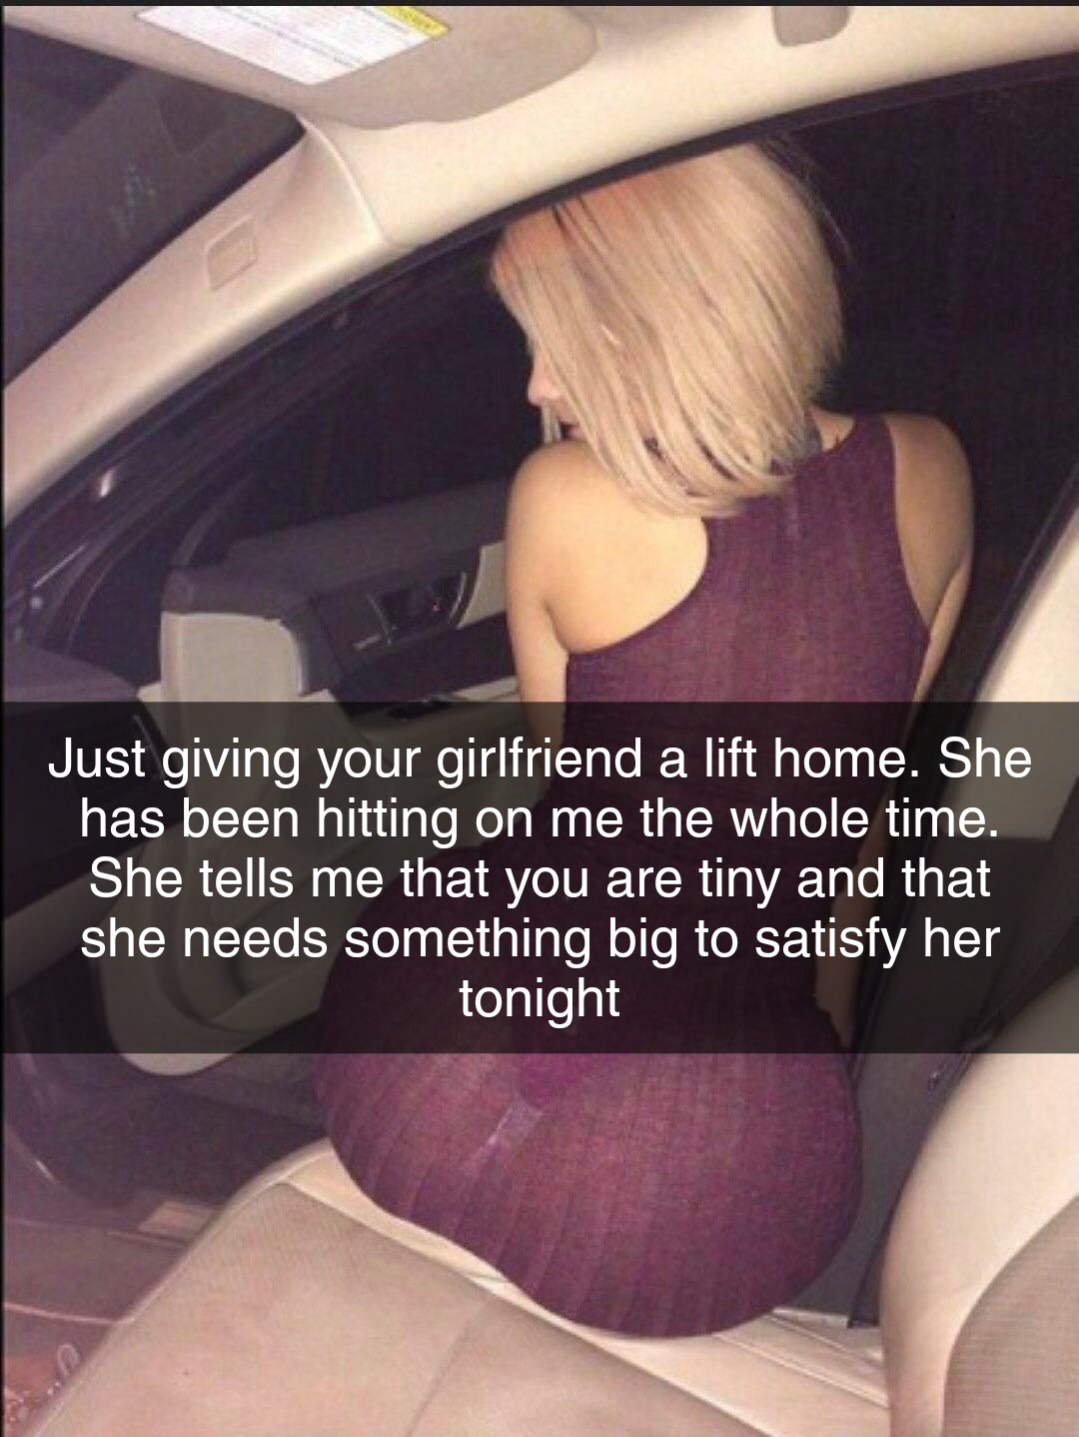 My friend who is an uber driver gave my girlfriend a lift home from mine when pic picture